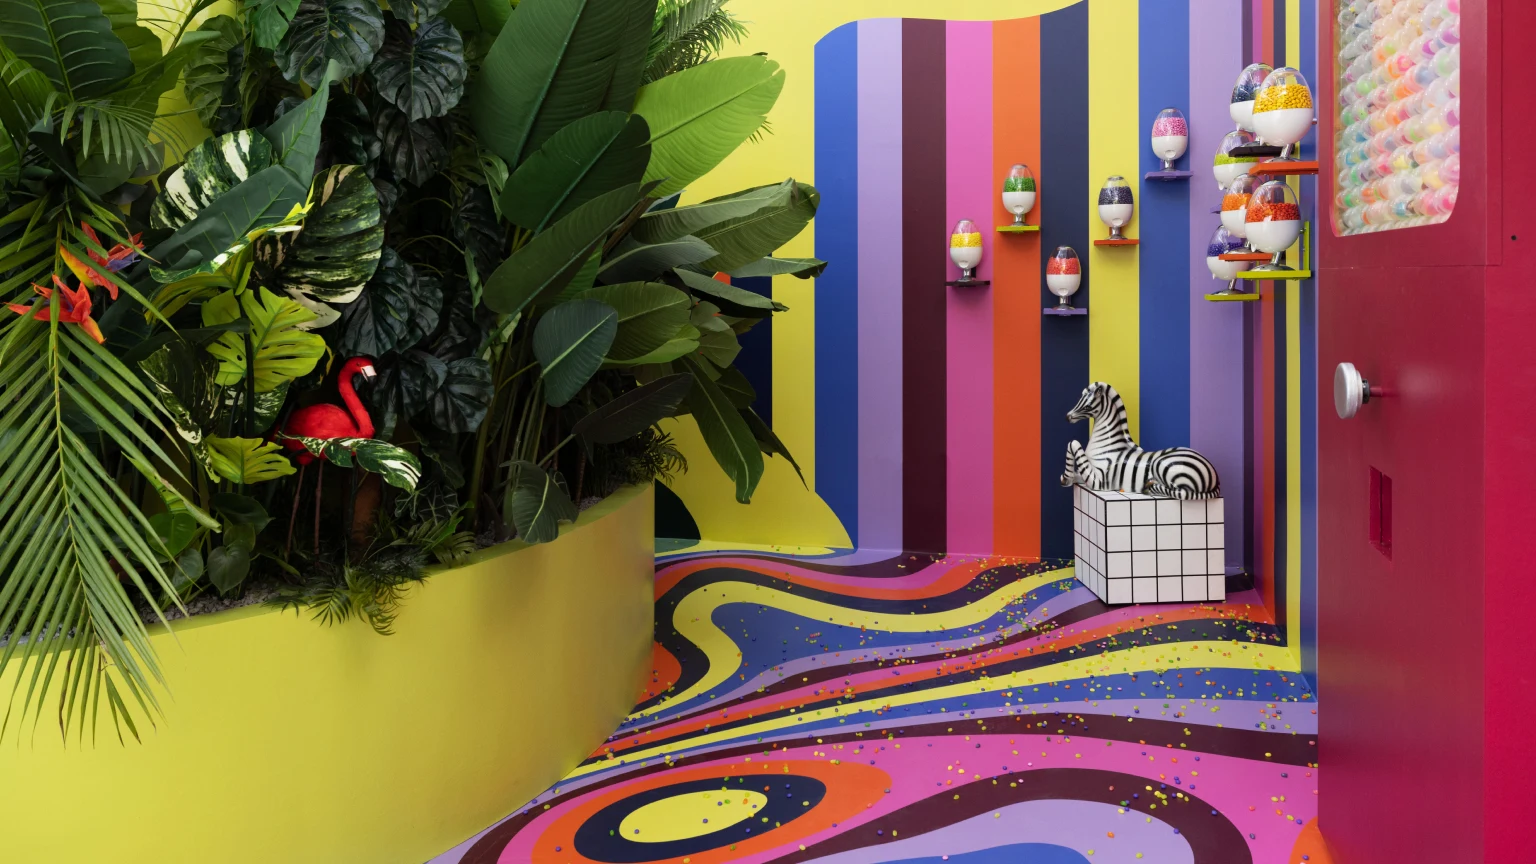  Conference space featuring tropical plants and a retro-patterned, brightly-colored floor design that continues up the walls.